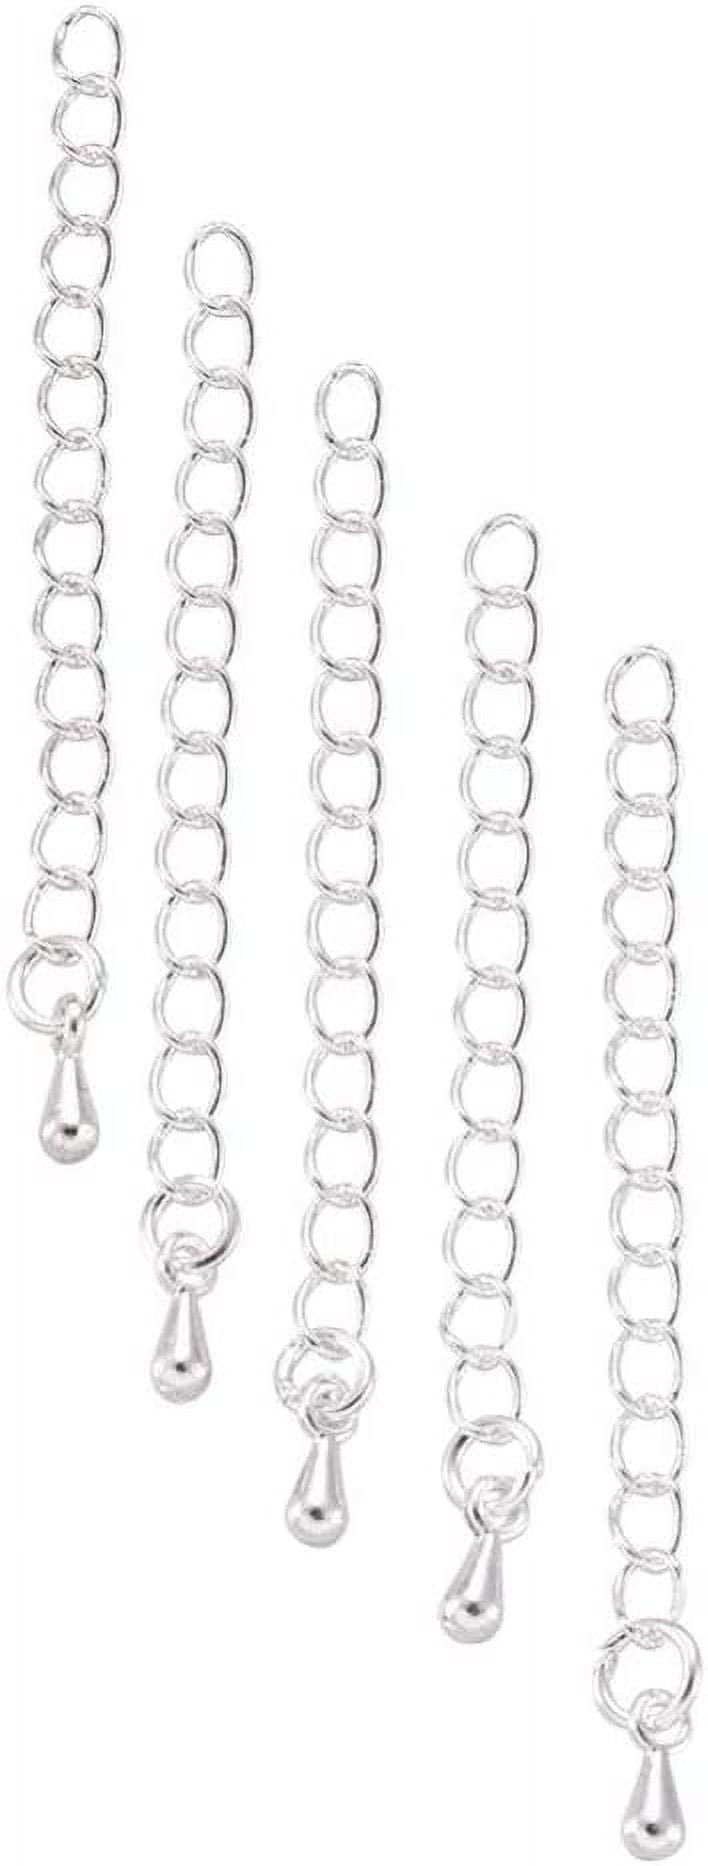 Haishen 80 100pcs Necklace Extension Chain (1.97 x 0.16 inch) Stainless Steel Twist Extender Chain Removable Chain Extension Tails Chain DIY Jewelry